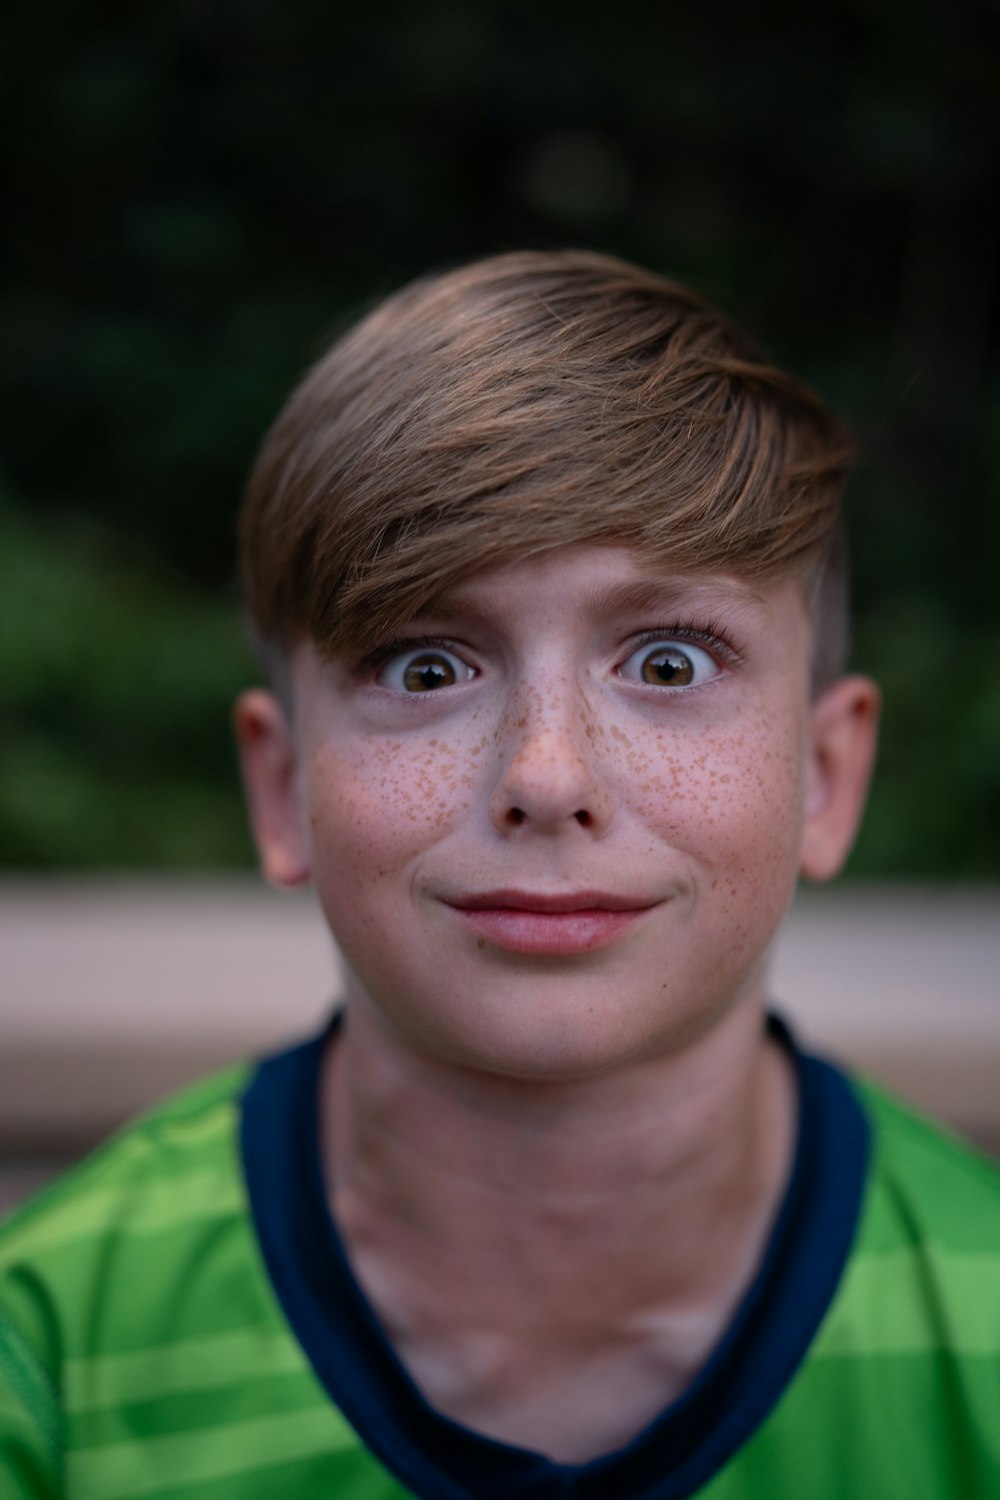 a young boy with freckles on his face